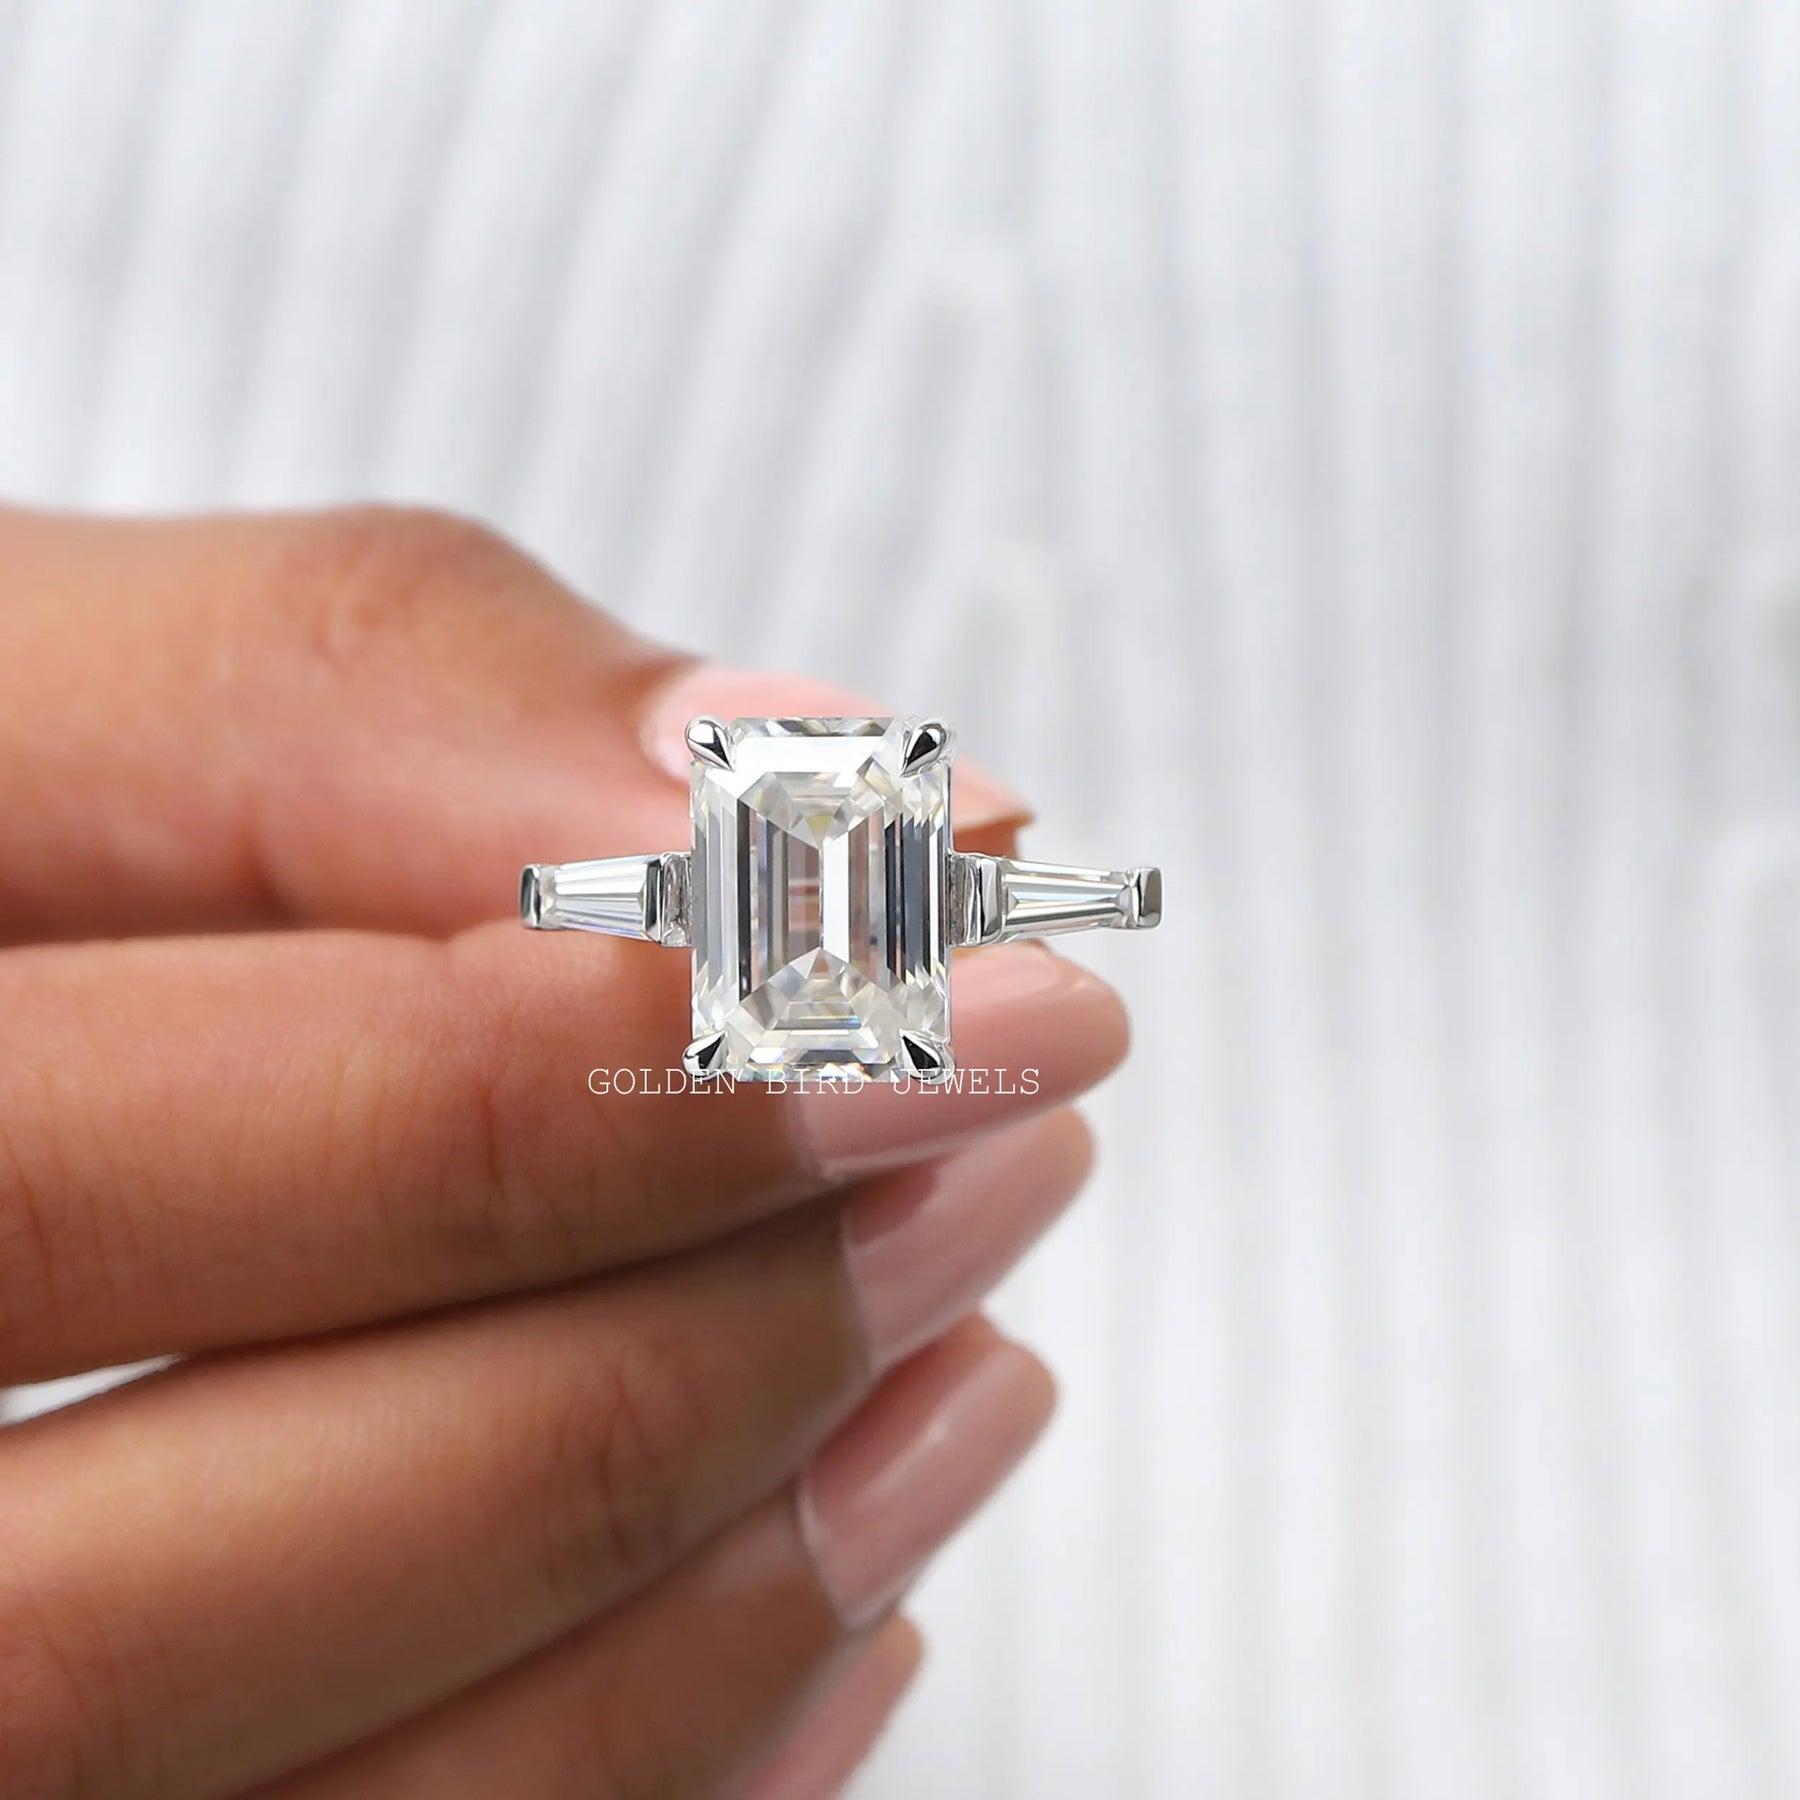 [Thre Stone Moissanite Ring Made With Emerald Cut]-[Golden Bird Jewels]